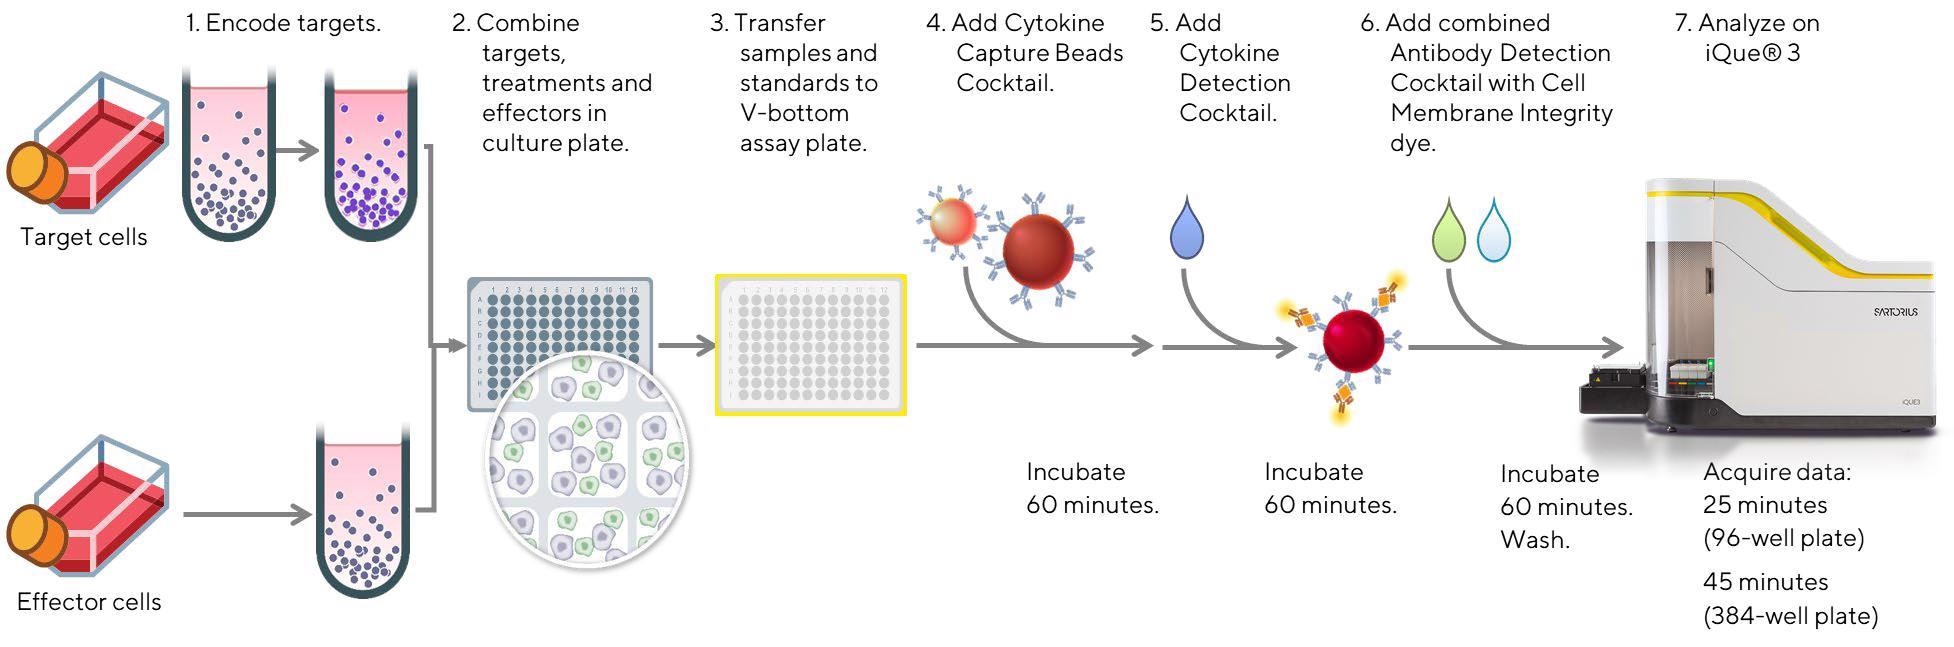 Schematic diagram of the workflow for the analysis of NK cell cytotoxic function, along with assessment of the NK cell activation state and cytokine/effector protein release using the iQue® Human NK Cell Killing Kit. Effector cells (Cellero; human PBMCs or enriched, negatively selected human NK cells) were thawed and allowed to recover in media (Corning; RPMI 1640 medium with 10% fetal bovine serum for enriched NK cells, or RPMI 1640 containing 10% FBS, 1% non-essential amino acids, 1% sodium pyruvate, and 1% Pen/Strep for PBMCs) for 16-18 h overnight. On the assay day, a frozen aliquot of CD20+ Raji tumor target cells (ATCC, Burkitt’s lymphoma cell line) previously stained with a fluorescent encoder dye, was thawed, counted, and plated in triplicate in a 96 well plate at 20 K/well for 30 minutes at room temperature in the presence of individual anti-CD20 mAbs at concentrations ranging between 0- 10 µg/mL. The anti-hCD20 mAbs (InvivoGen) included hcd20-mab1 (Rtx-G1) composed of a human IgG1 Fc region and variable region of rituximab, hcd20ga-mab1 (Ob-G1) which was a fully humanized mAb with the variable region of obinutuzumab and a native human IgG1 Fc region, and hcd20ga-mab13 (Ob-G1nF) with the variable region of obinutuzumab and a nonfucosylated human IgG1 Fc region. Another anti-hCD20 mAb, hcd20ga-mab7 (Ob-A2), was used as a negative control. It also possessed the variable region of obinutuzumab, but had a human IgA2 constant region, and did not bind FcγRIIIa (CD16a). Next, effector cells were added at an Effector to Target (E:T) ratio of 10:1 (PBMCs) or 1:1 (enriched NK cells). In parallel, effector cells were cultured in triplicate in media alone, or cocultured with targets alone to evaluate direct tumor cell killing without antibody. Direct antibody-mediated killing of tumor cells was also assessed by culturing Raji cells with anti-CD20 mAbs in the absence of effector cells. Following co-culture for 4 hours at 37 °C, 5% CO2, 10 µL samples were assayed using the multiplexed iQue® Human NK Cell Killing Kit plus iQue® Human NK Companion Kits, and data acquisition was performed on the iQue® platform (VBR configuration) for advanced flow cytometry.